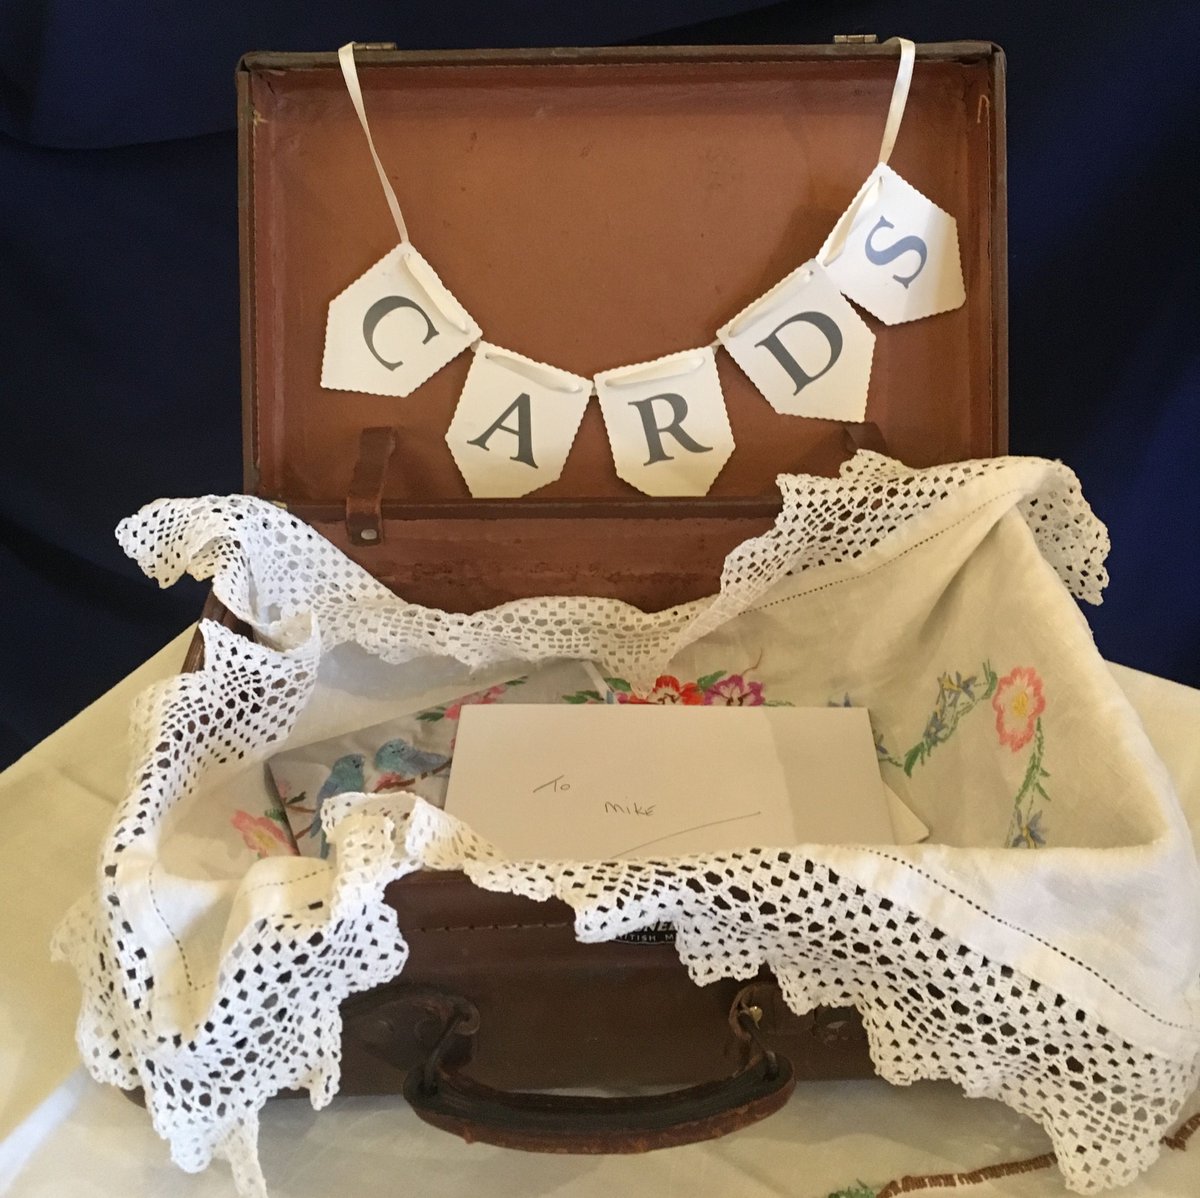 Add style and theatre to your vintage wedding!  A suitcase is perfect for collecting your guests cards or holding confetti cones! #vintagehire #vintageteacup #vintagechina #vintageevents #vintagestyle #vintagetea #Surrey #events #weddings #sussex #afternoontea #teaparties